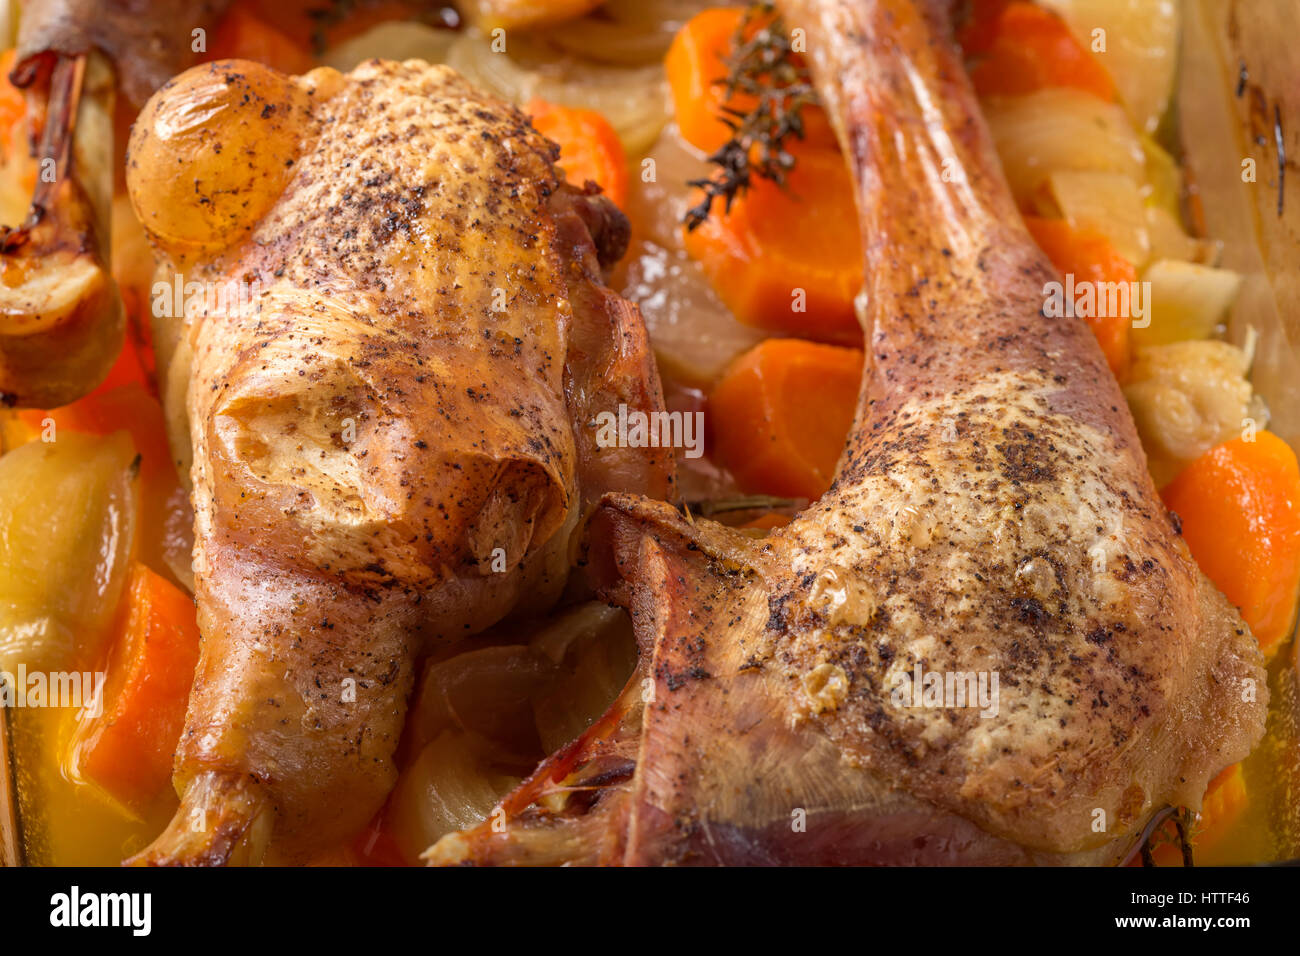 Roast chicken in tray with carrot and onion Stock Photo